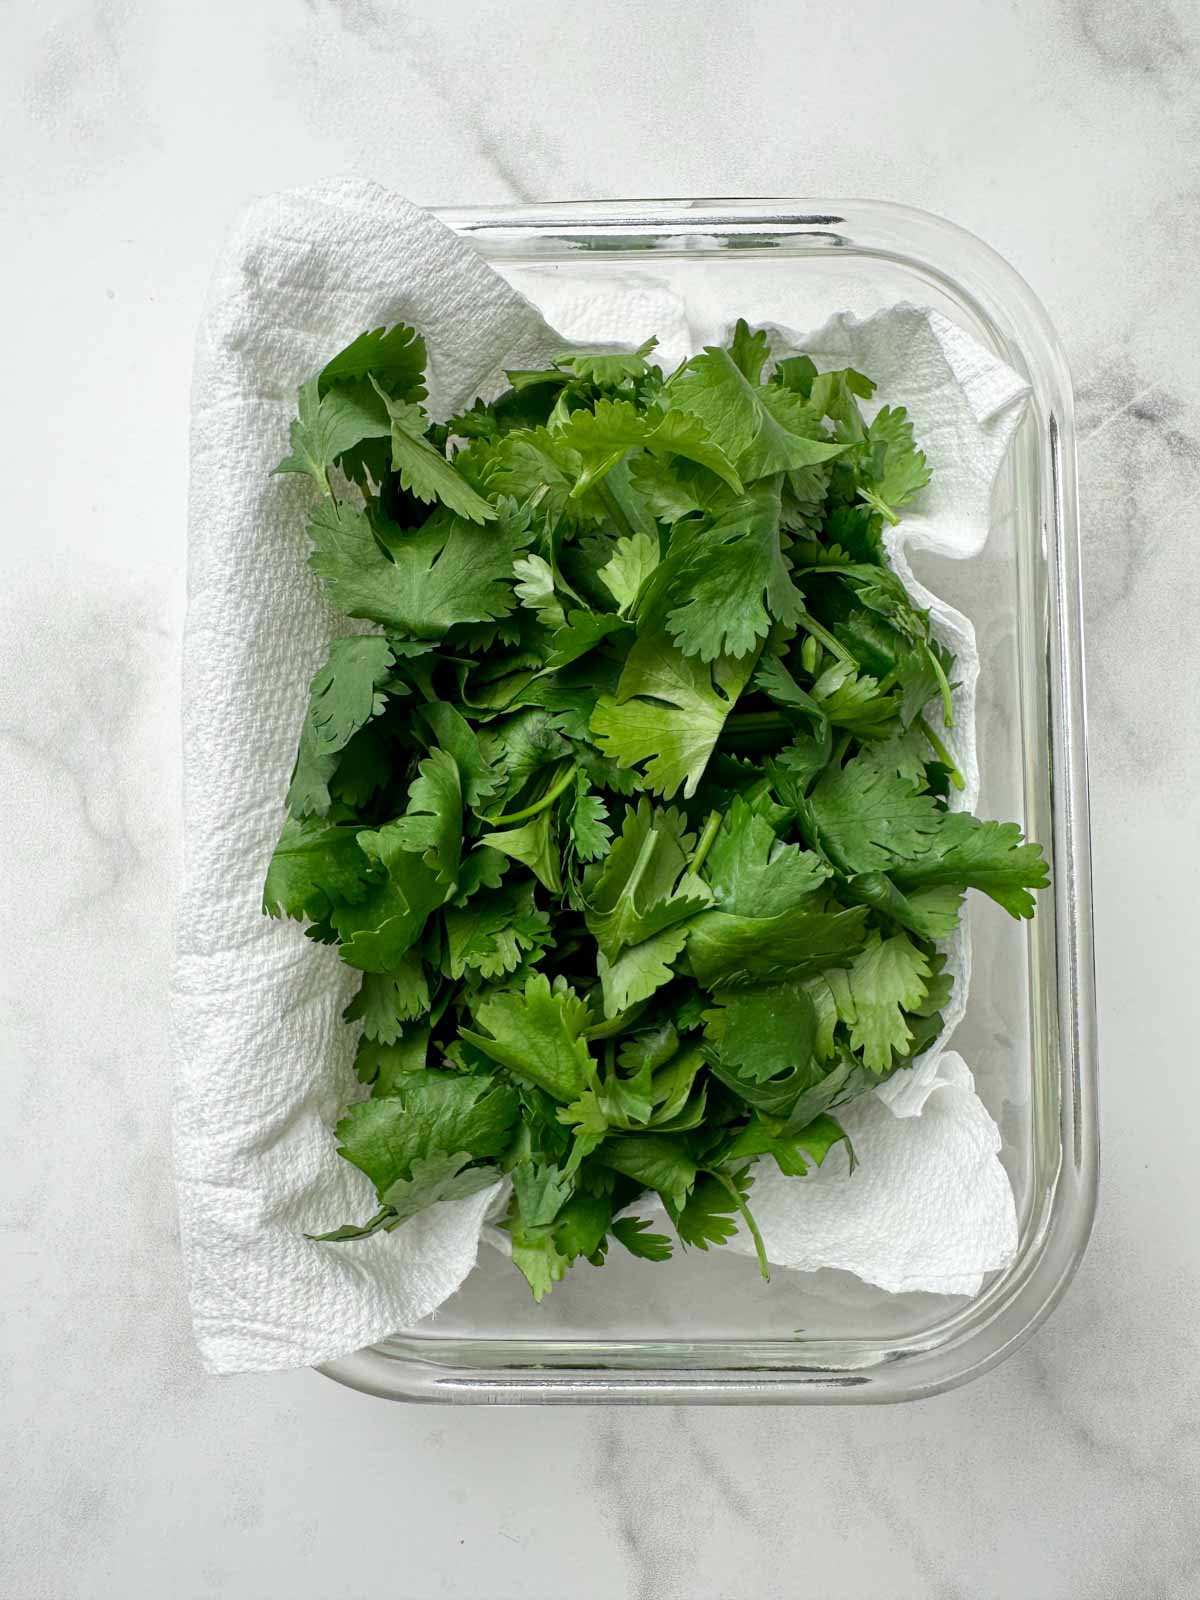 roughly chopped cilantro stored in a glass container under the paper towel